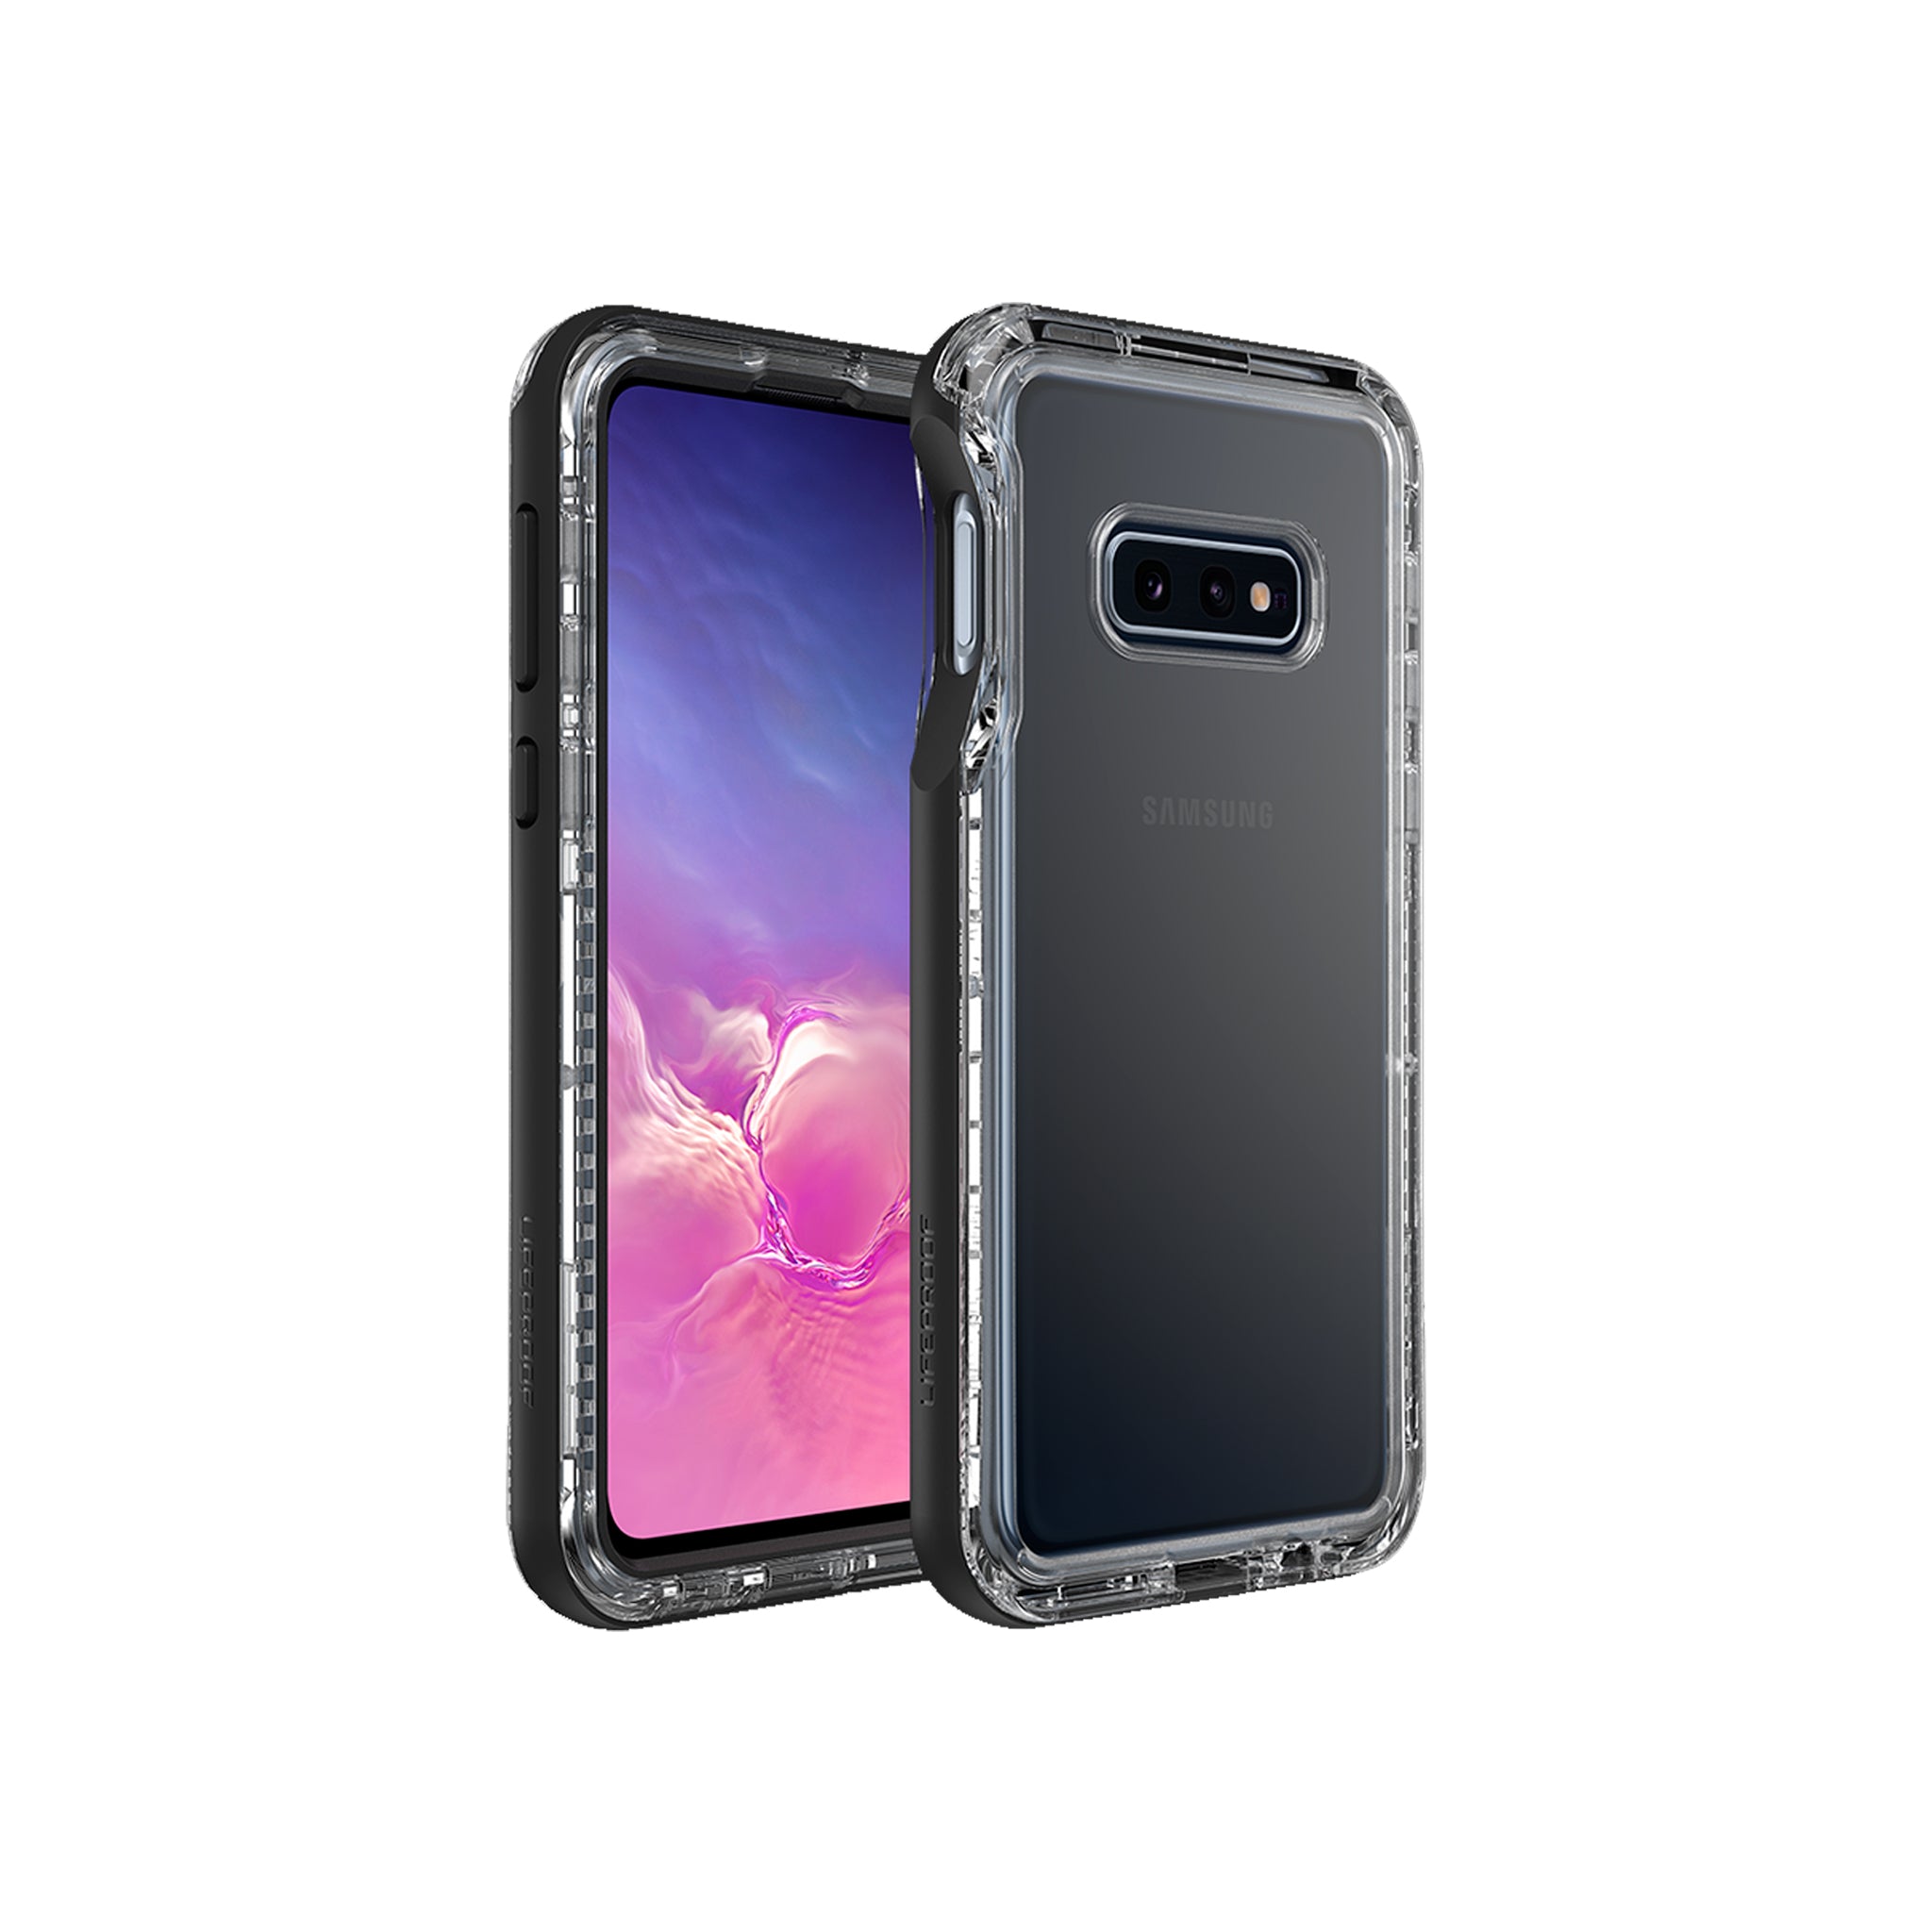 LifeProof - Next Series Case for Samsung Galaxy S10e - Black